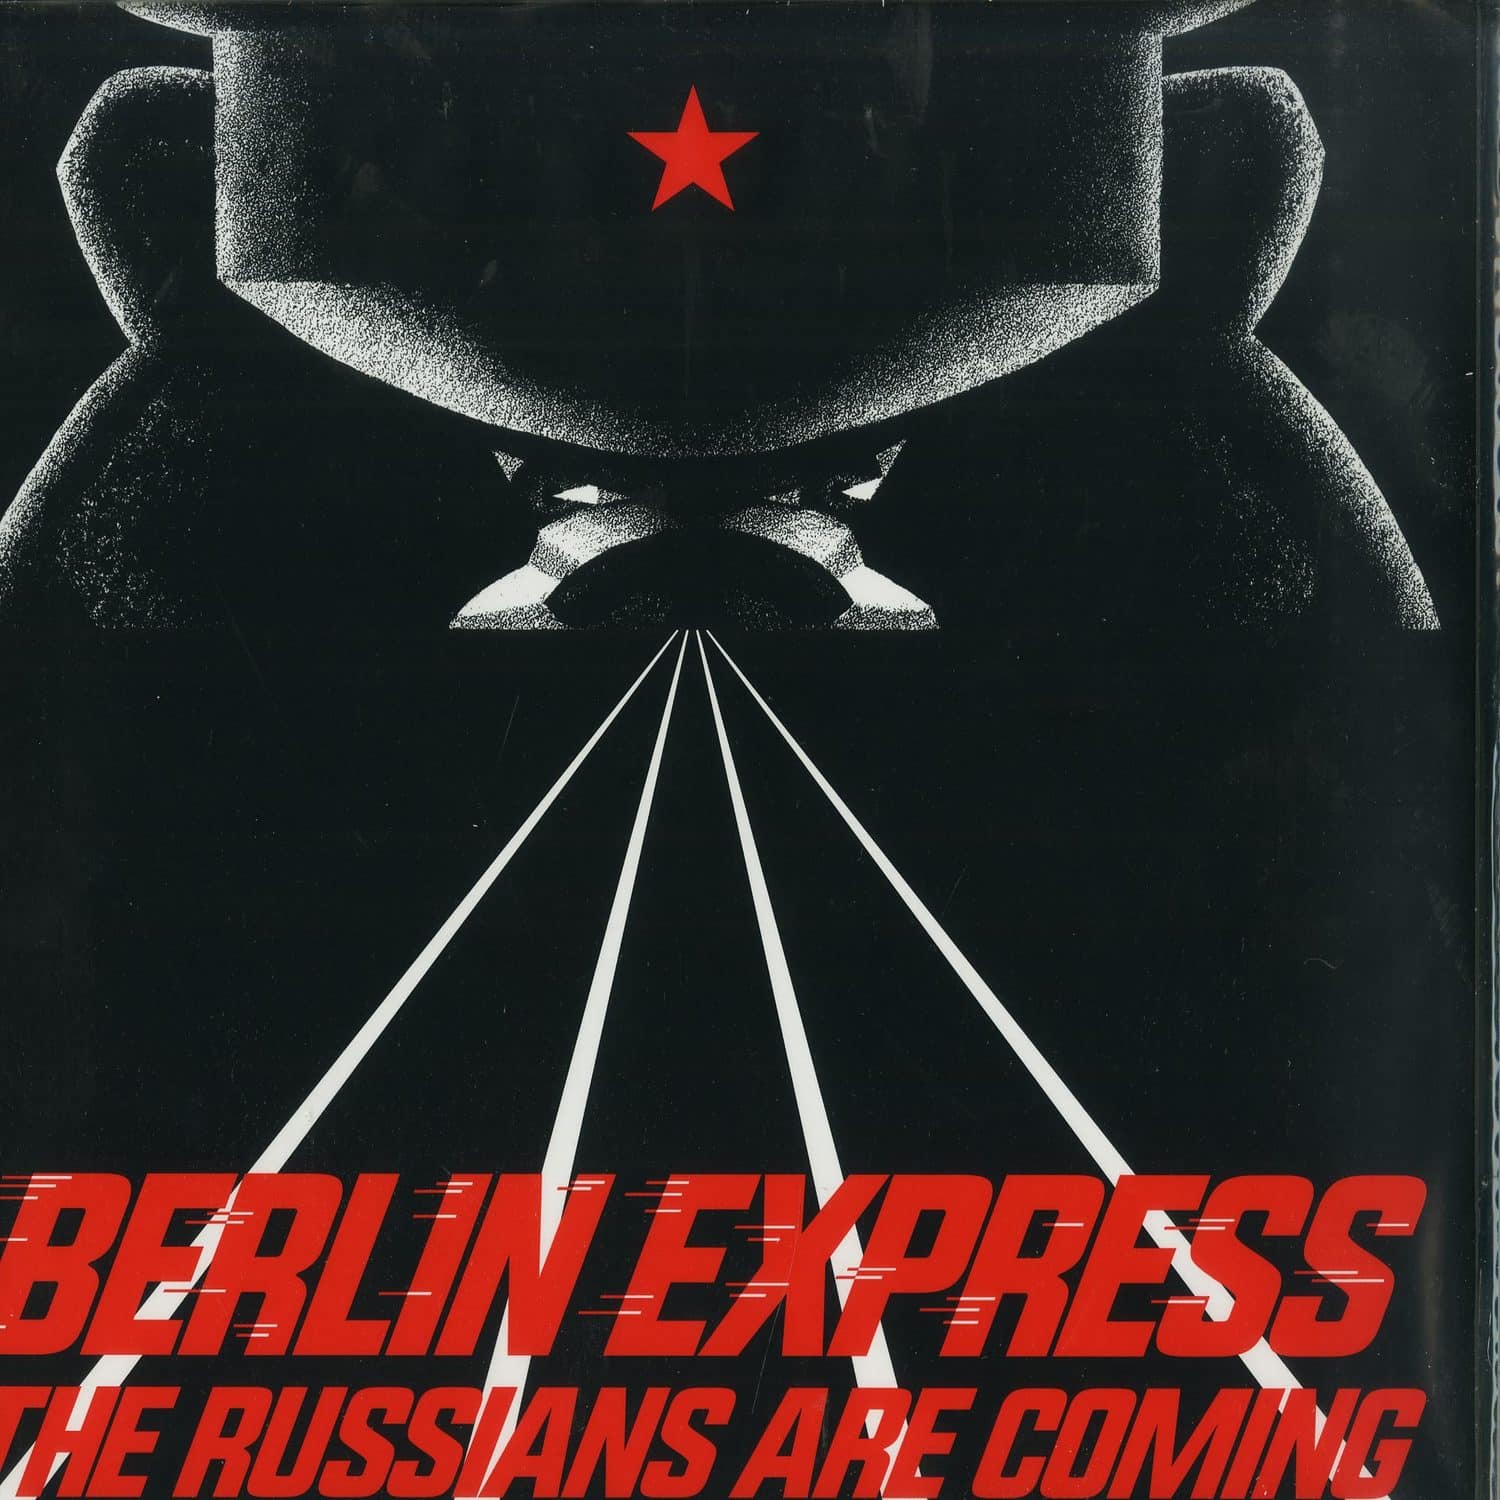 Berlin Express - THE RUSSIANS ARE COMING